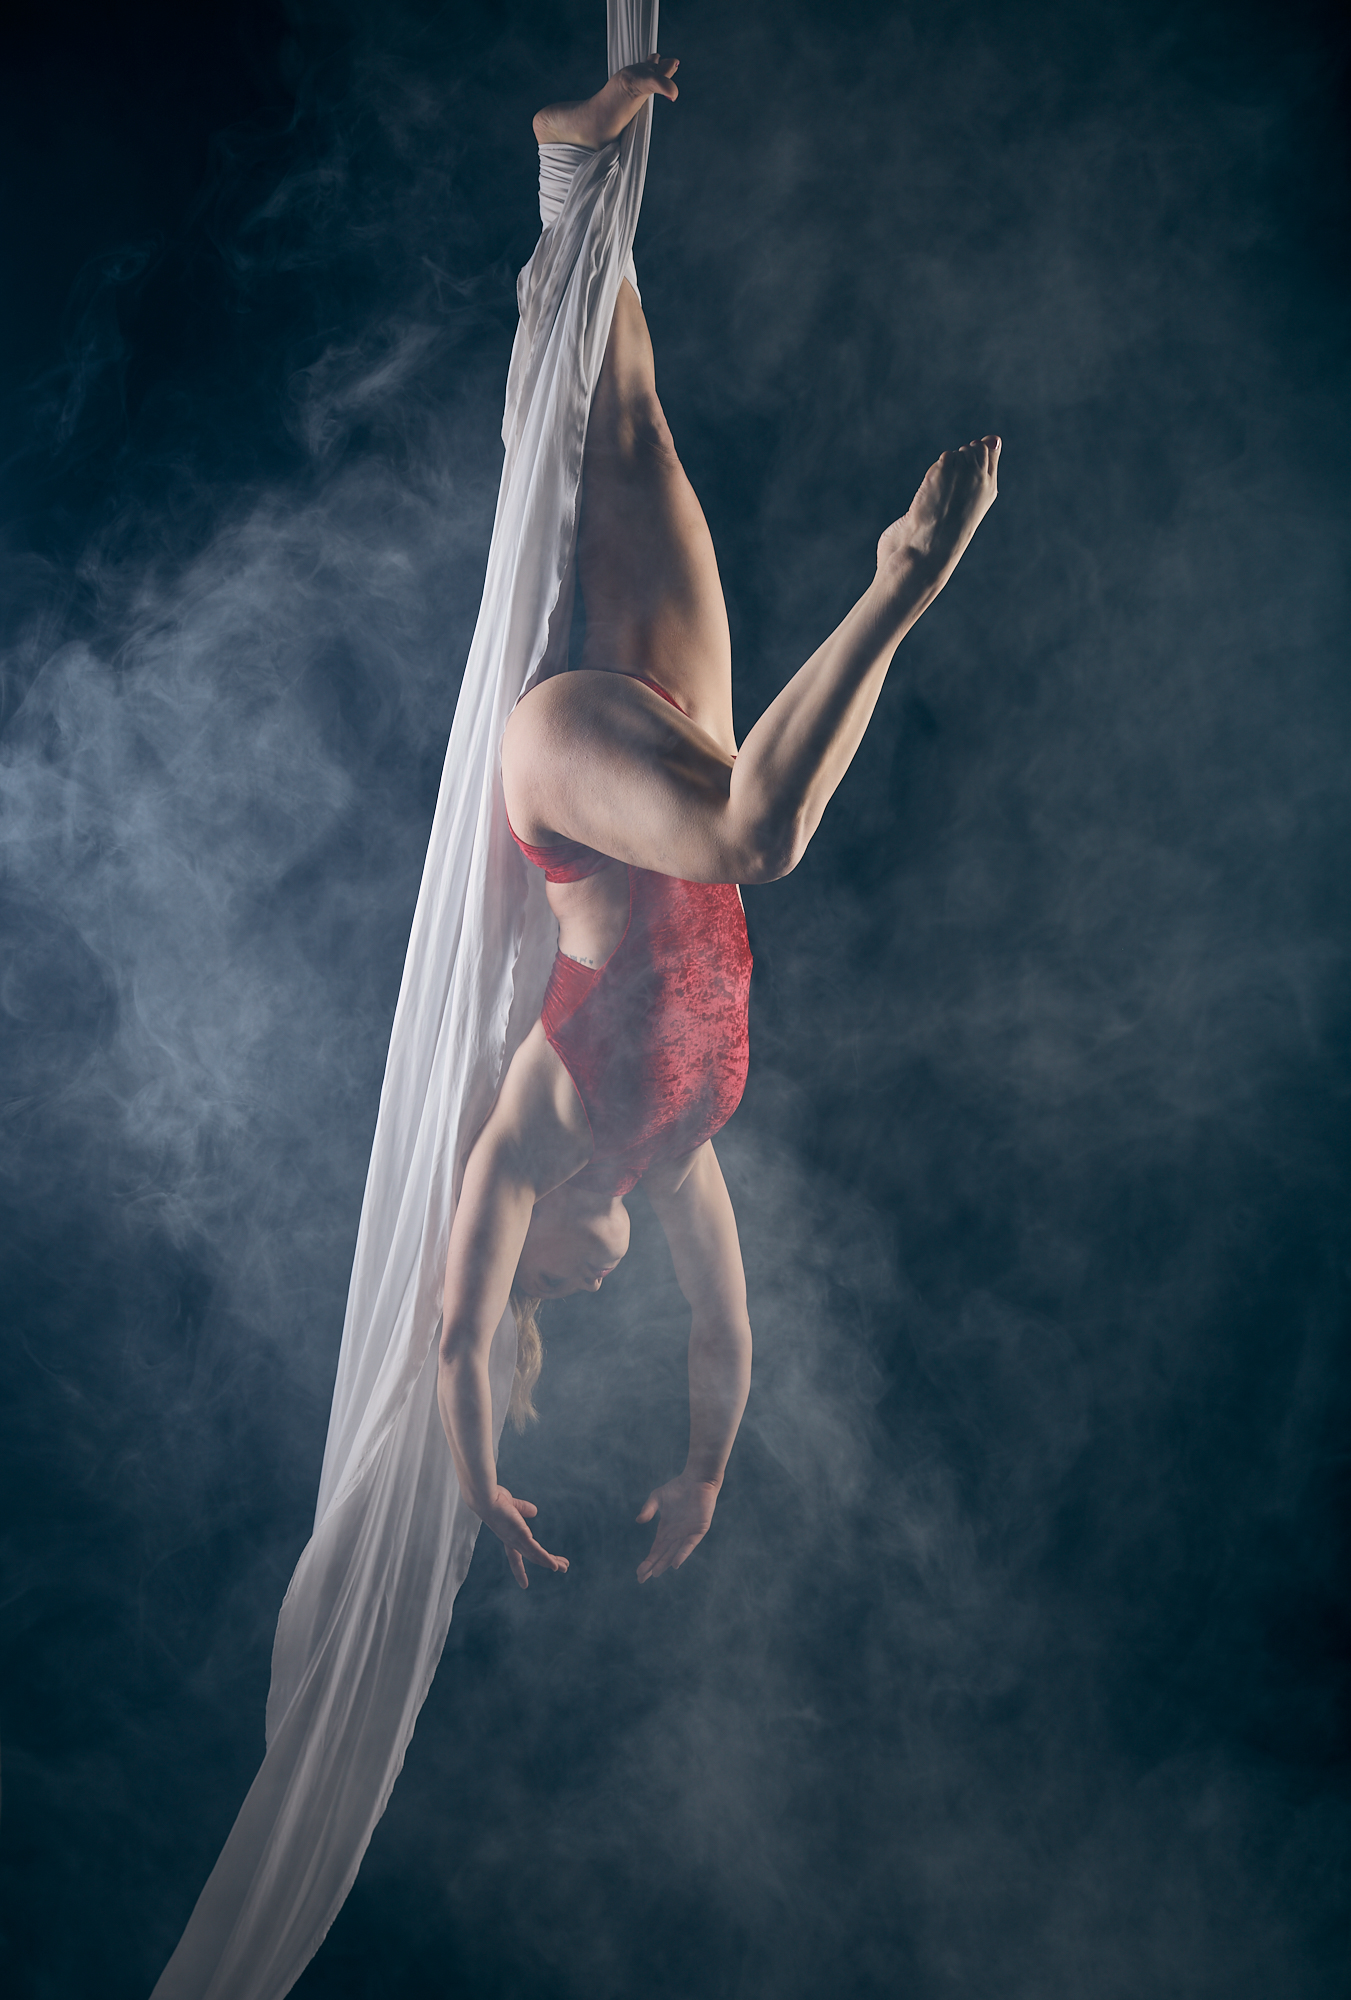 Inverted: Circus & Pole Fitness